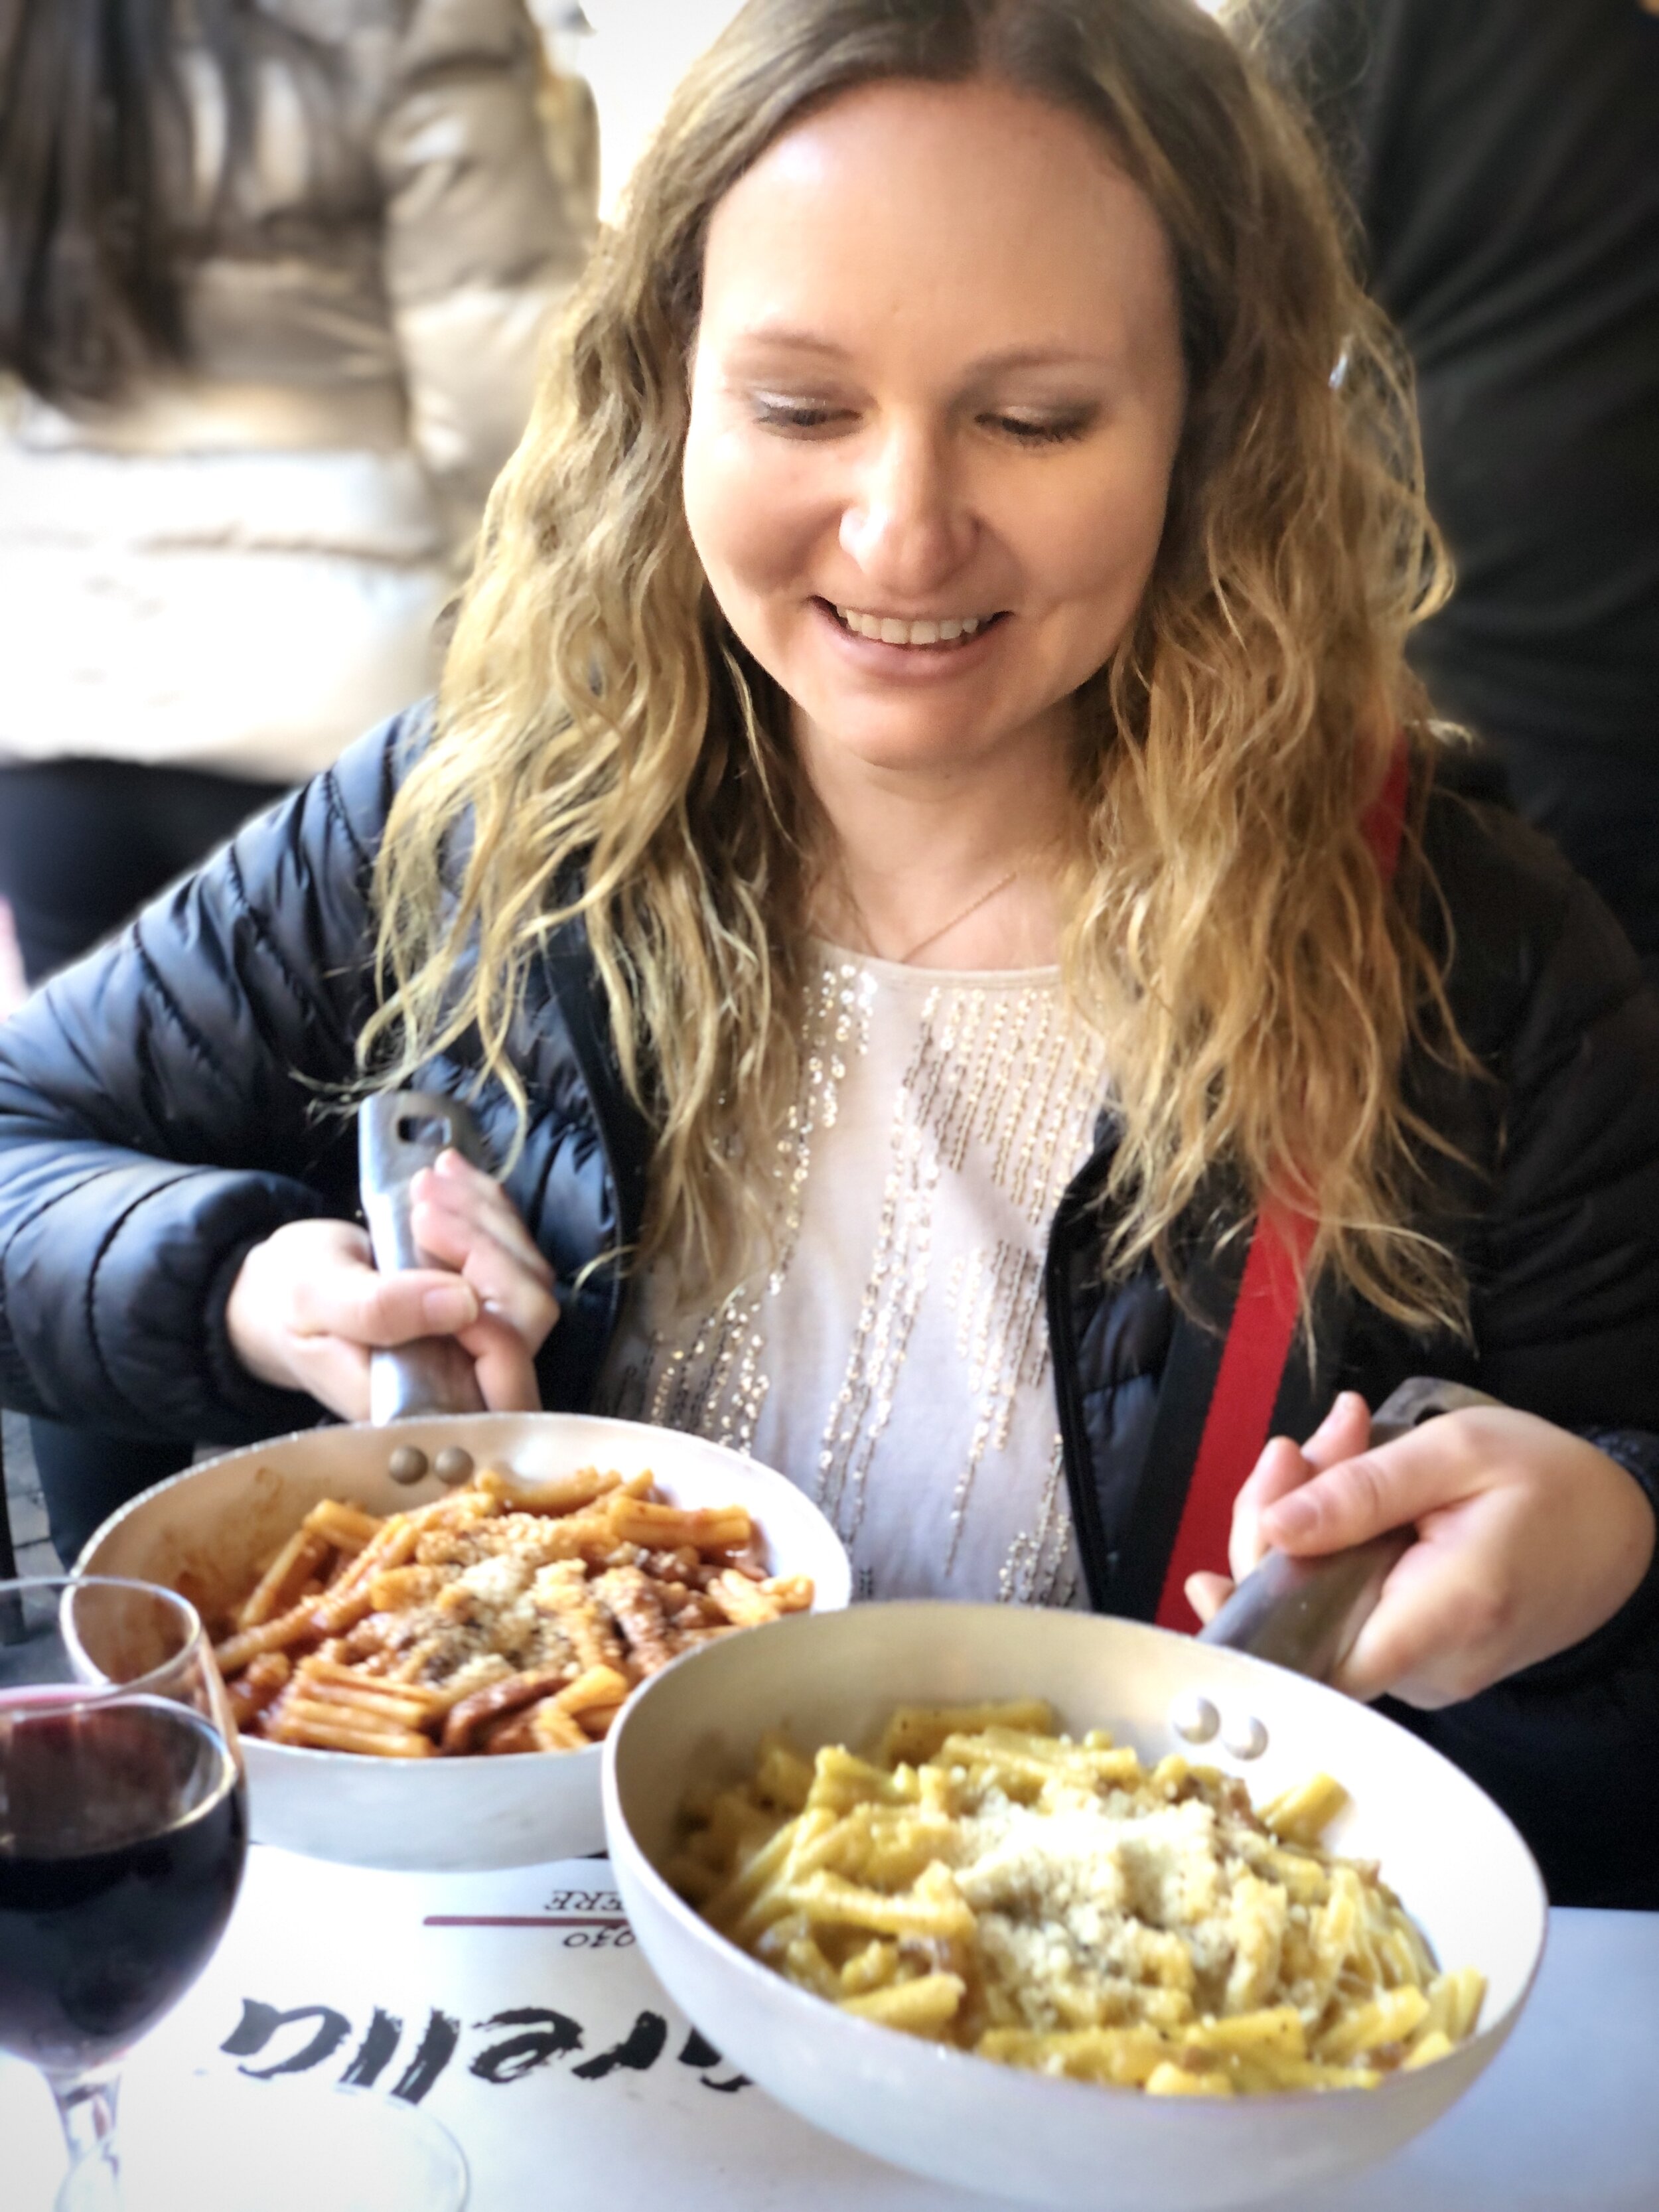 The Gluten Free Travelers eating gluten free pasta at Nannerella in Rome, Italy